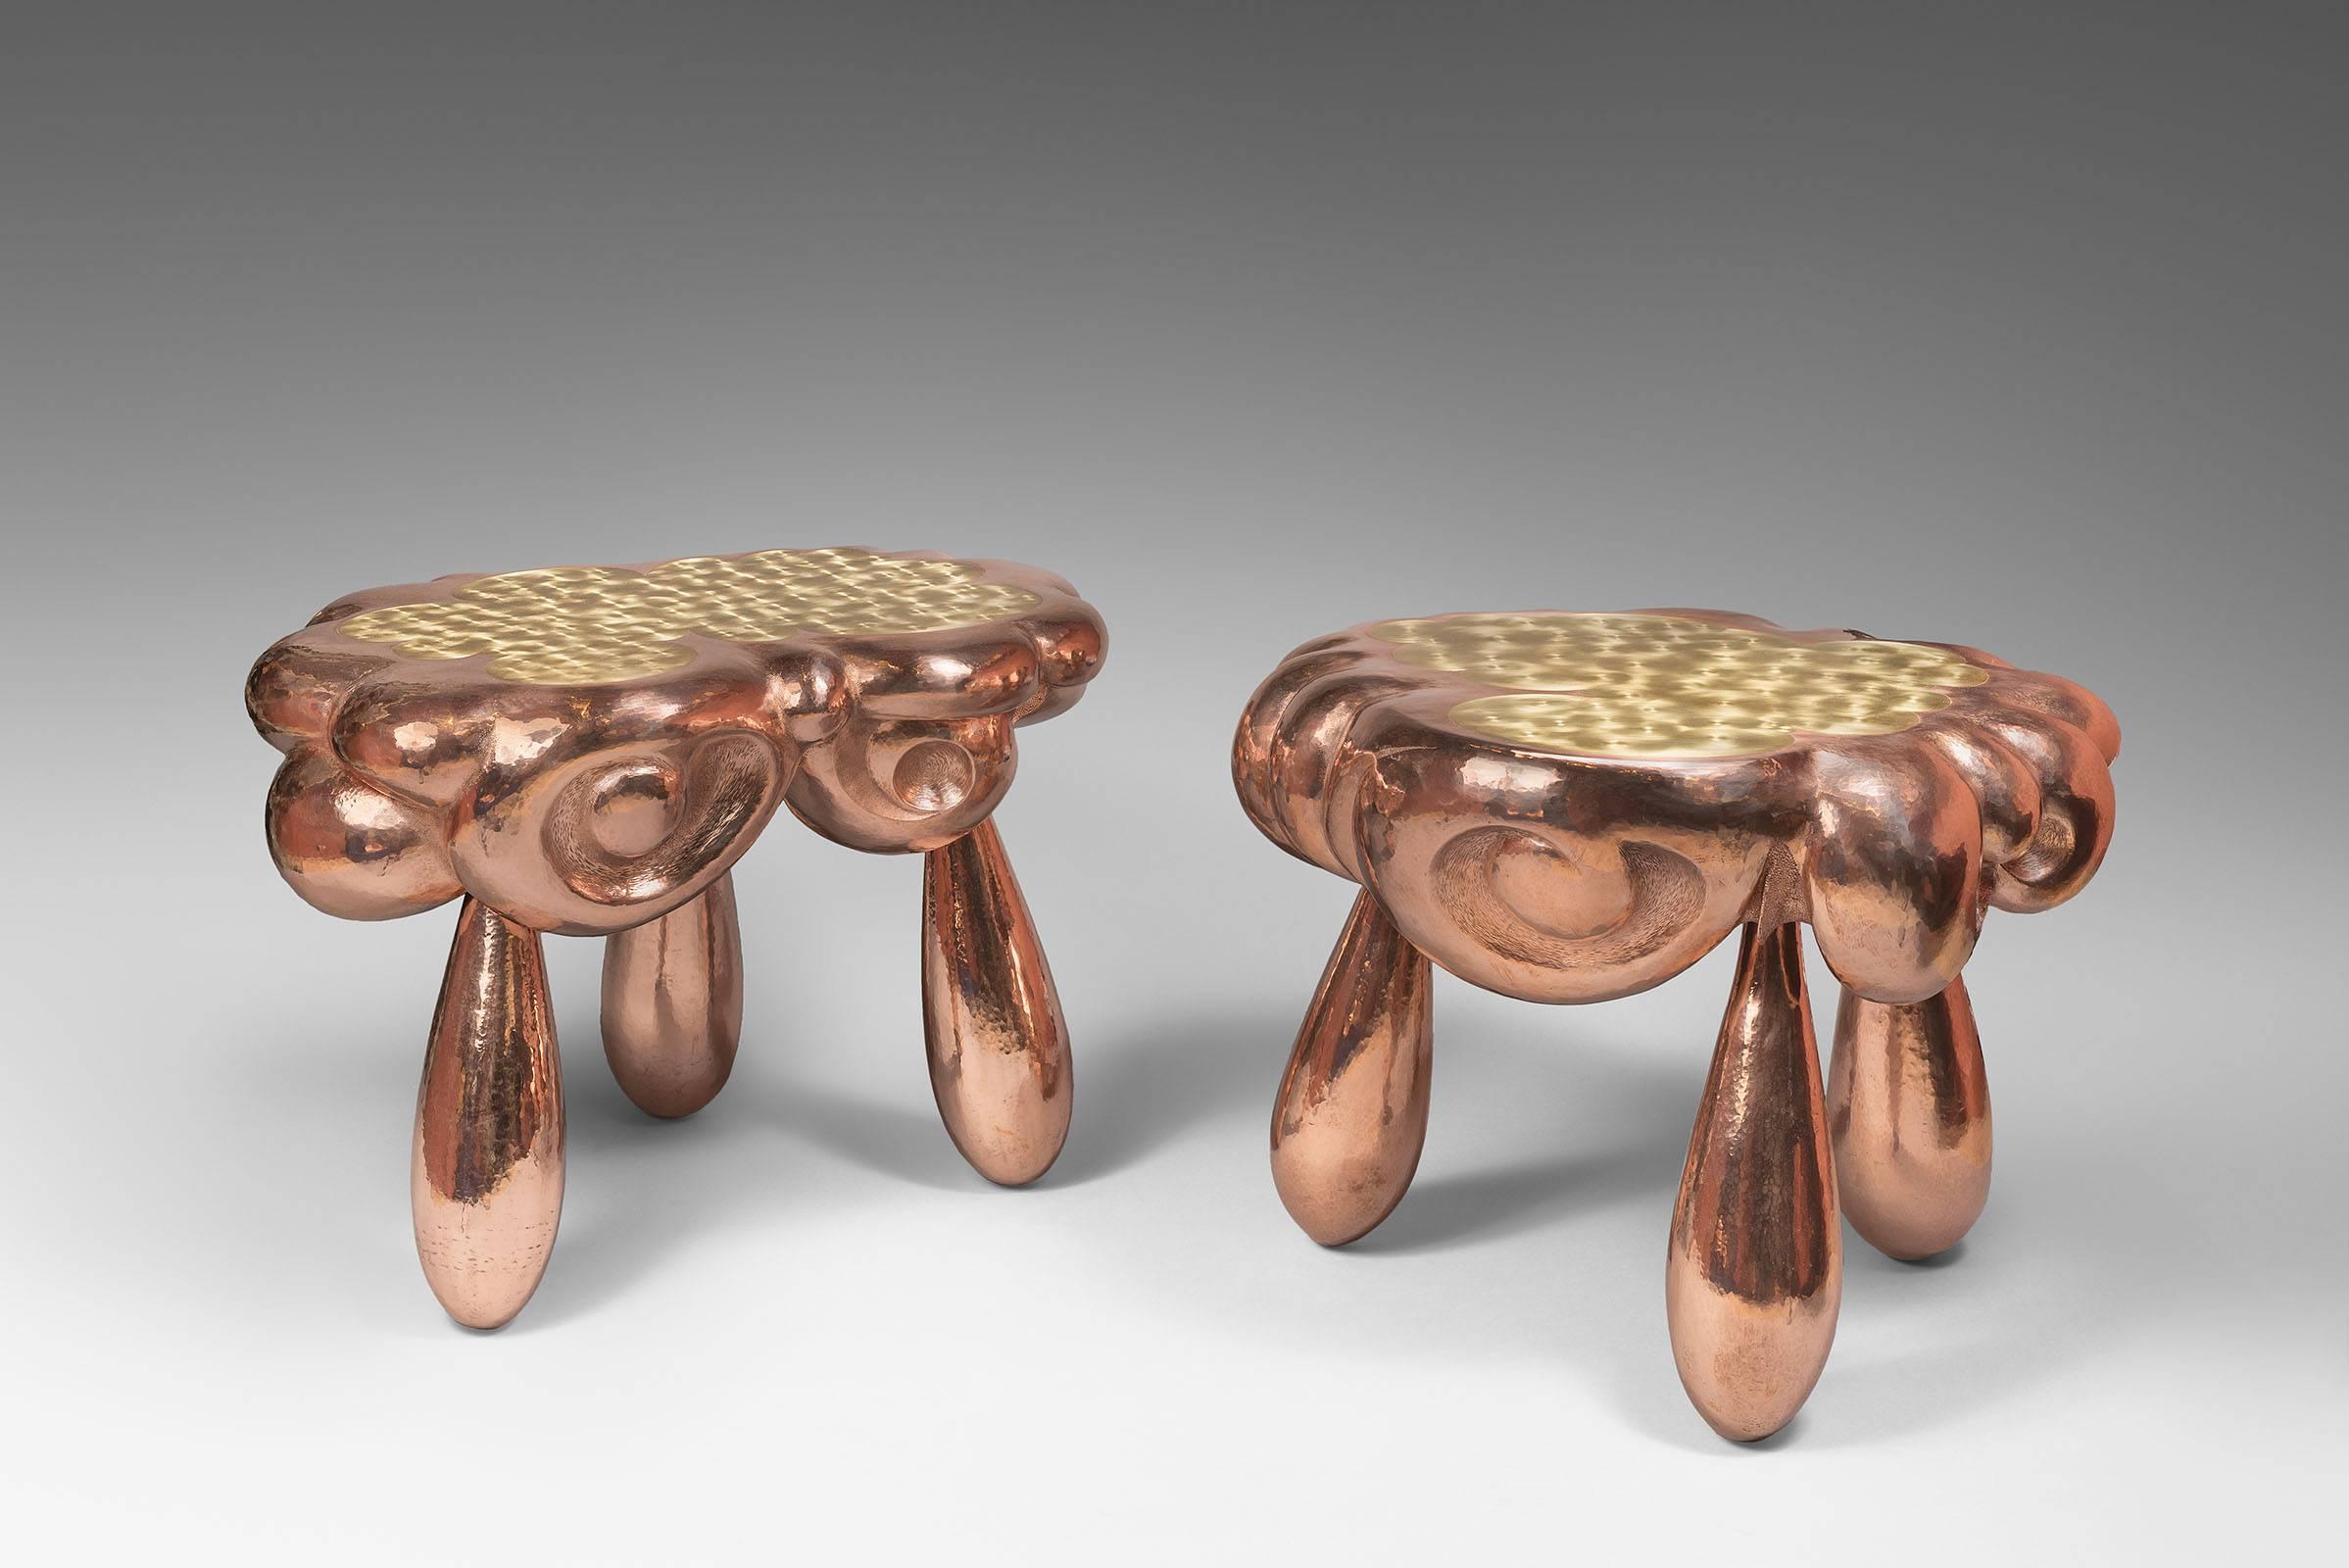 Nathanaël Le Berre.
Born in 1976.
Nathanaël Le Berre Laureat 2014 of Liliane Bettencourt award for the cleverness of the hand. 
Pair of coffee tables 2016 "Clouds on three drops of rain," hammered and engraved copper, tops adorned with